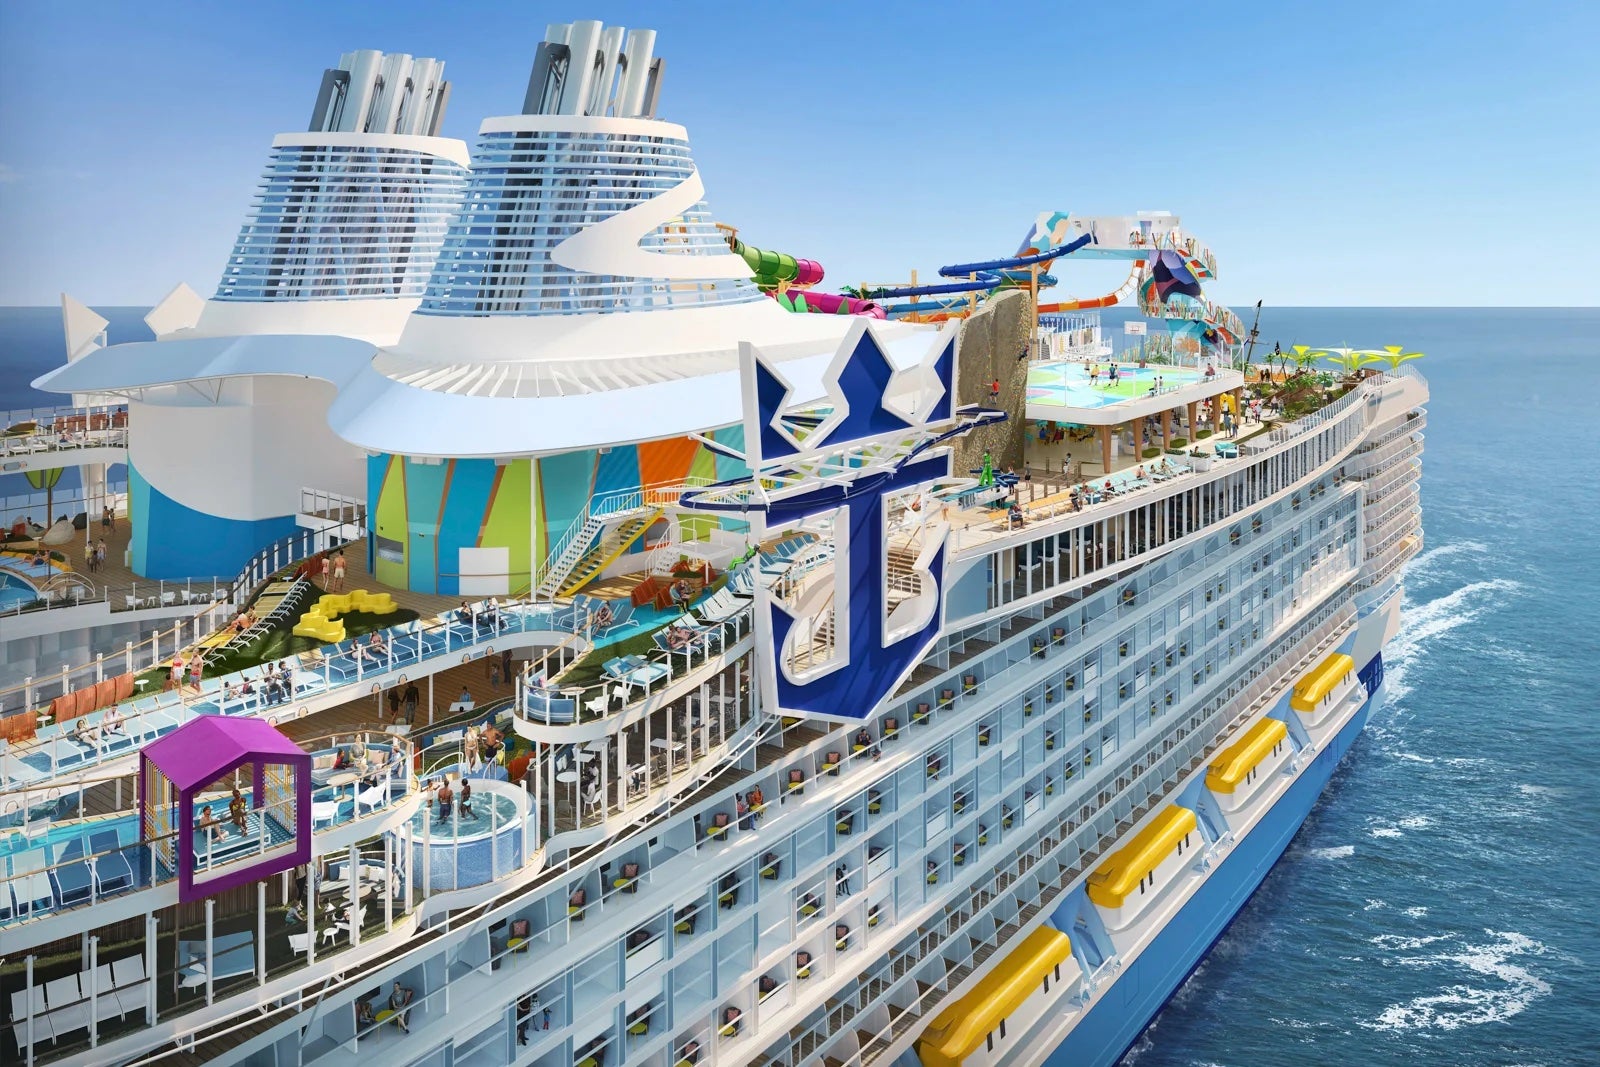 Icon of the Seas', the new world's largest cruise ship, most eye